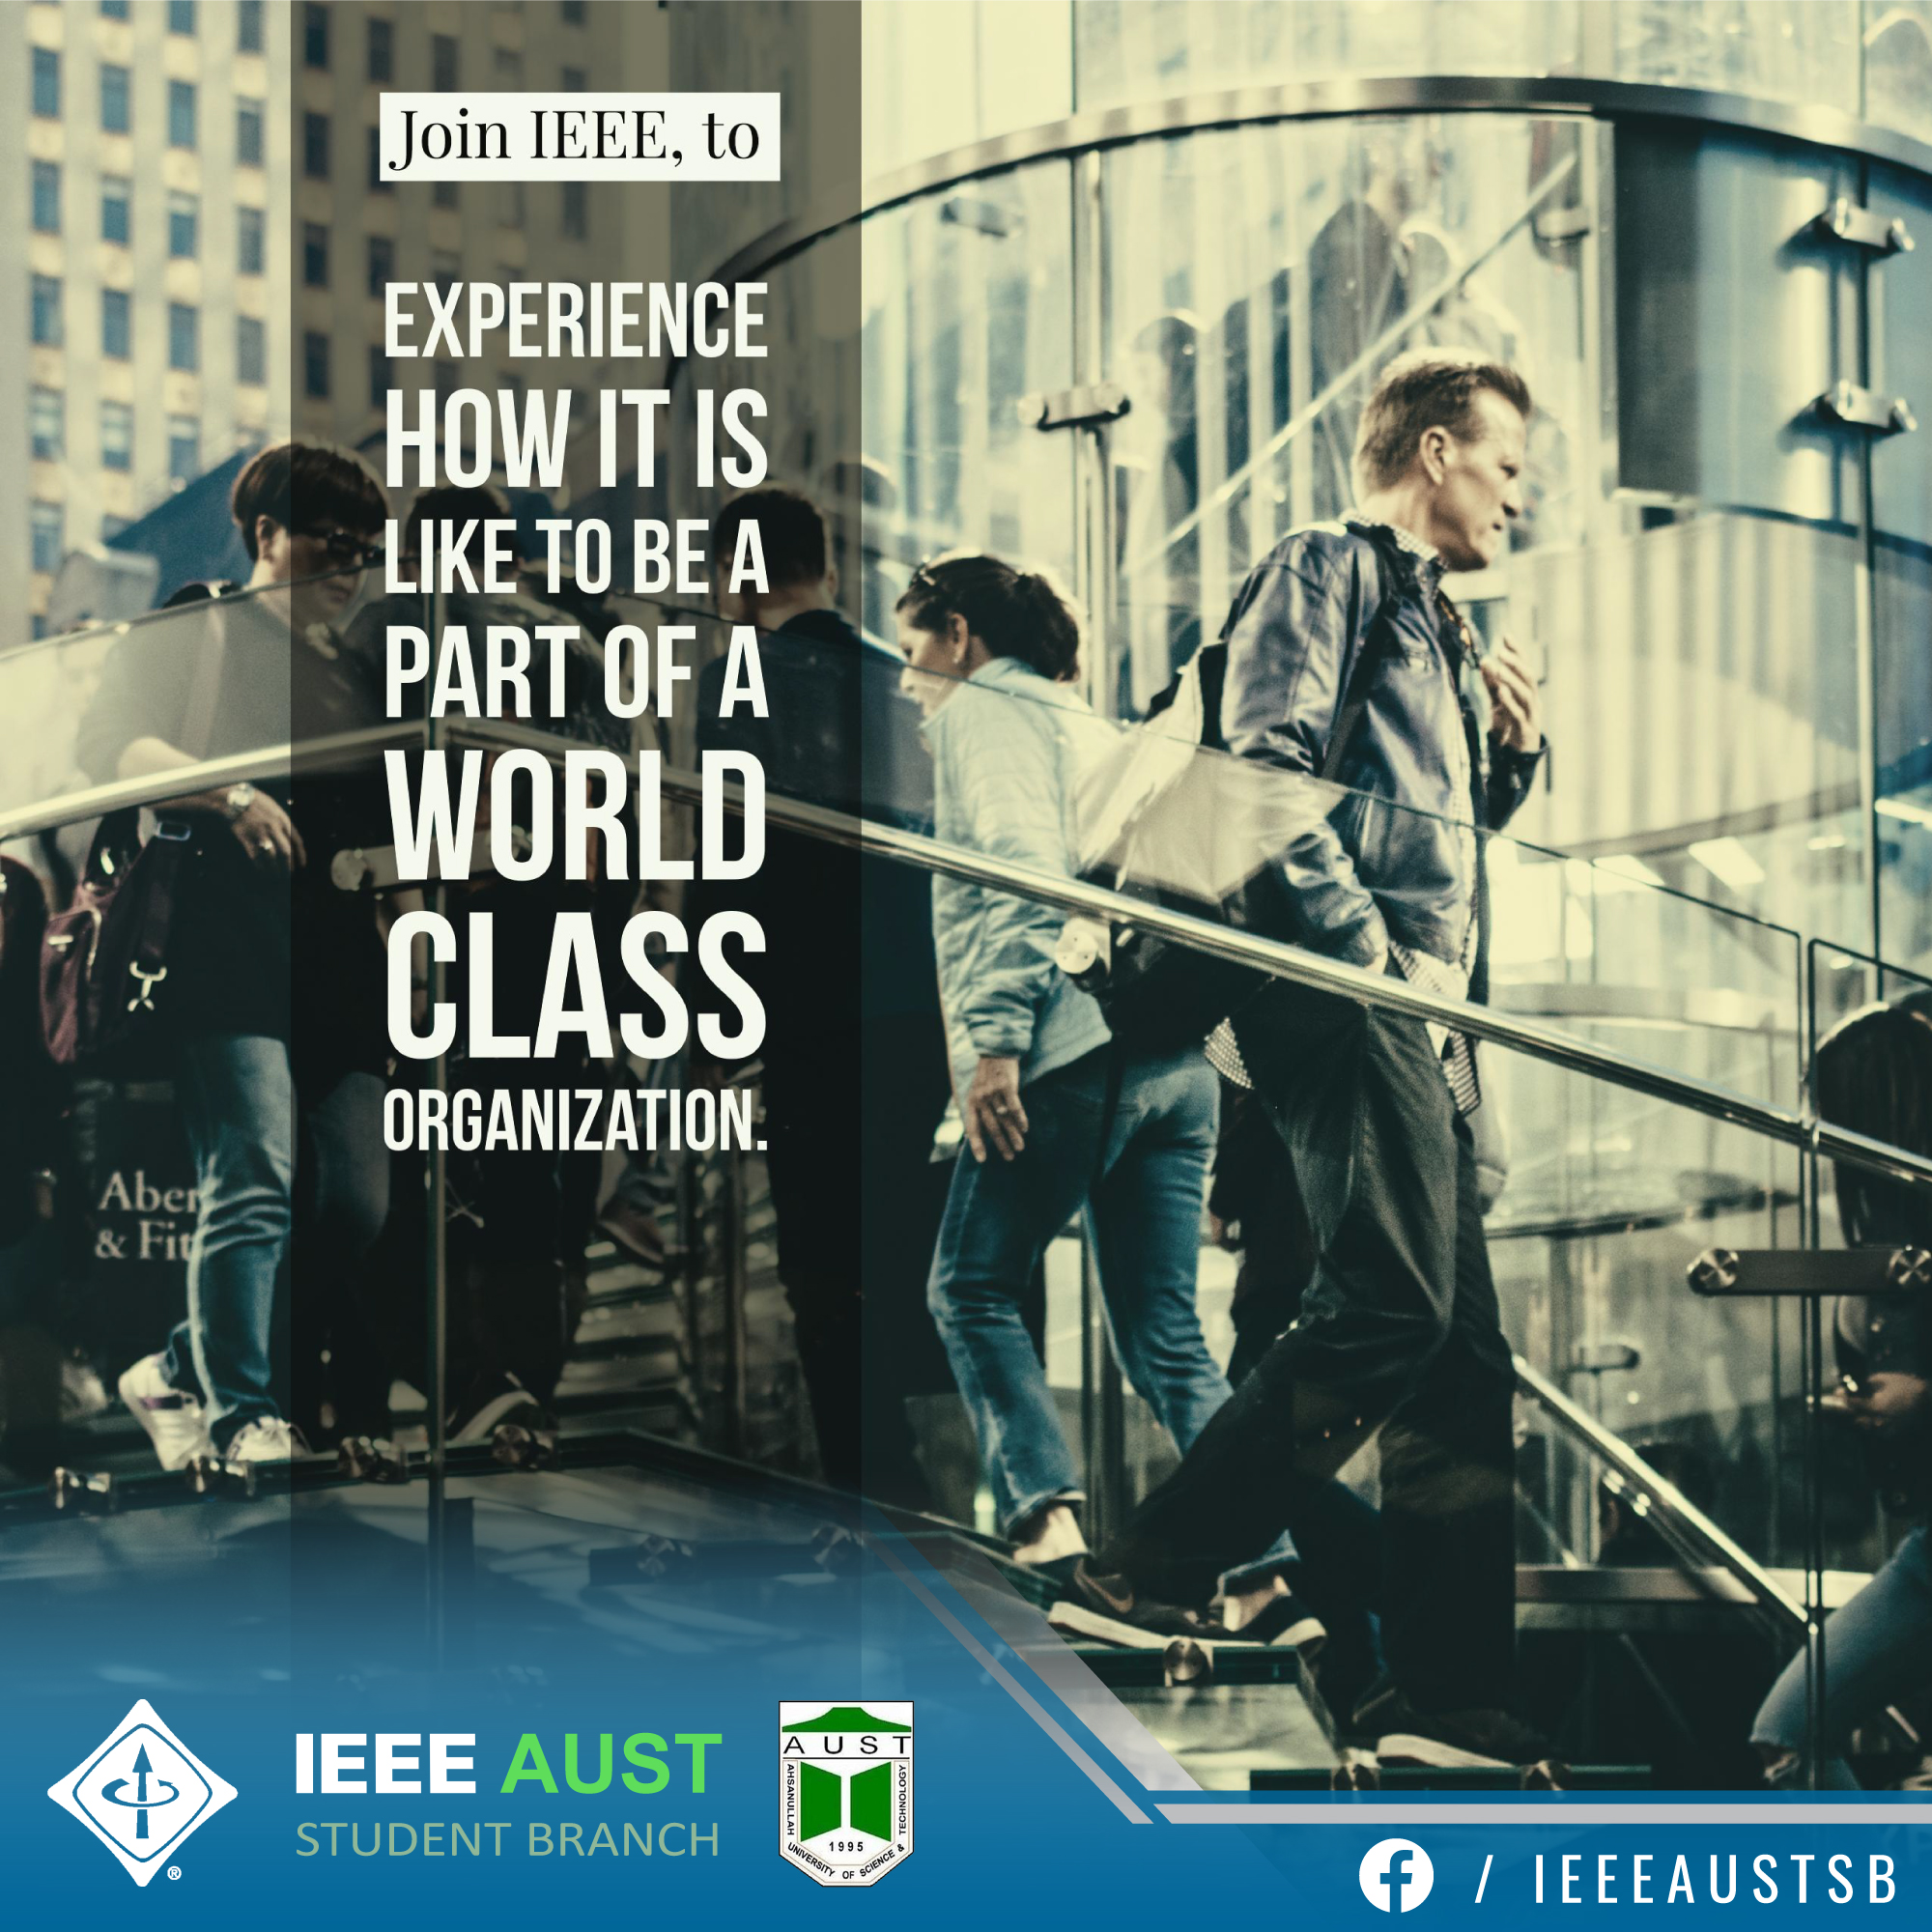 Join IEEE to experience how it is like to be a part of a world class organization.